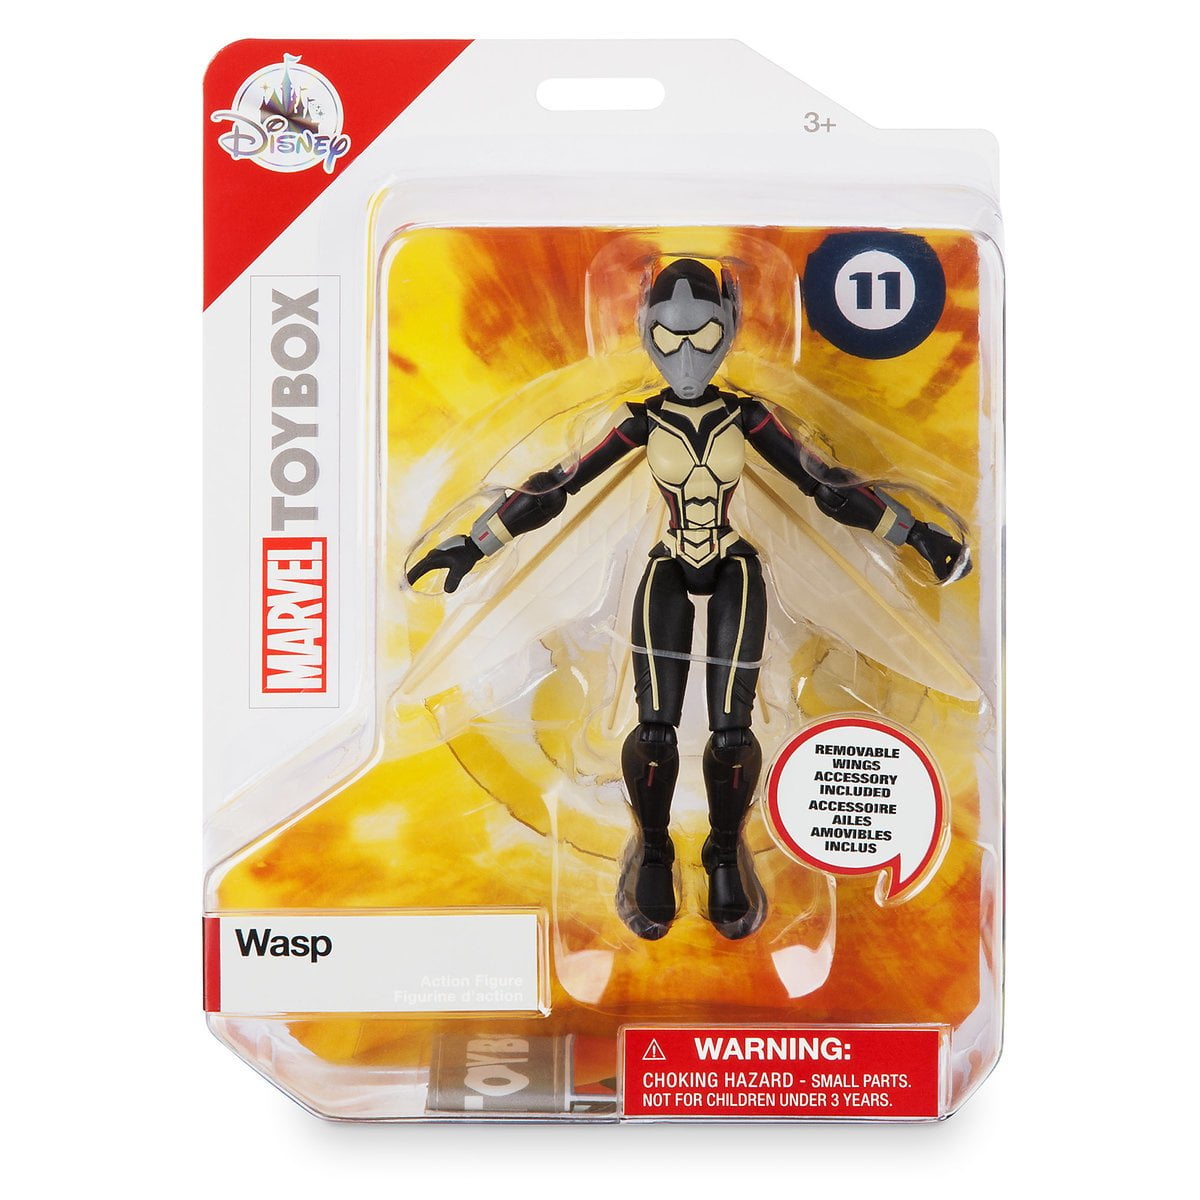 Disney Store Wasp Action Figure Marvel Toybox New with Box